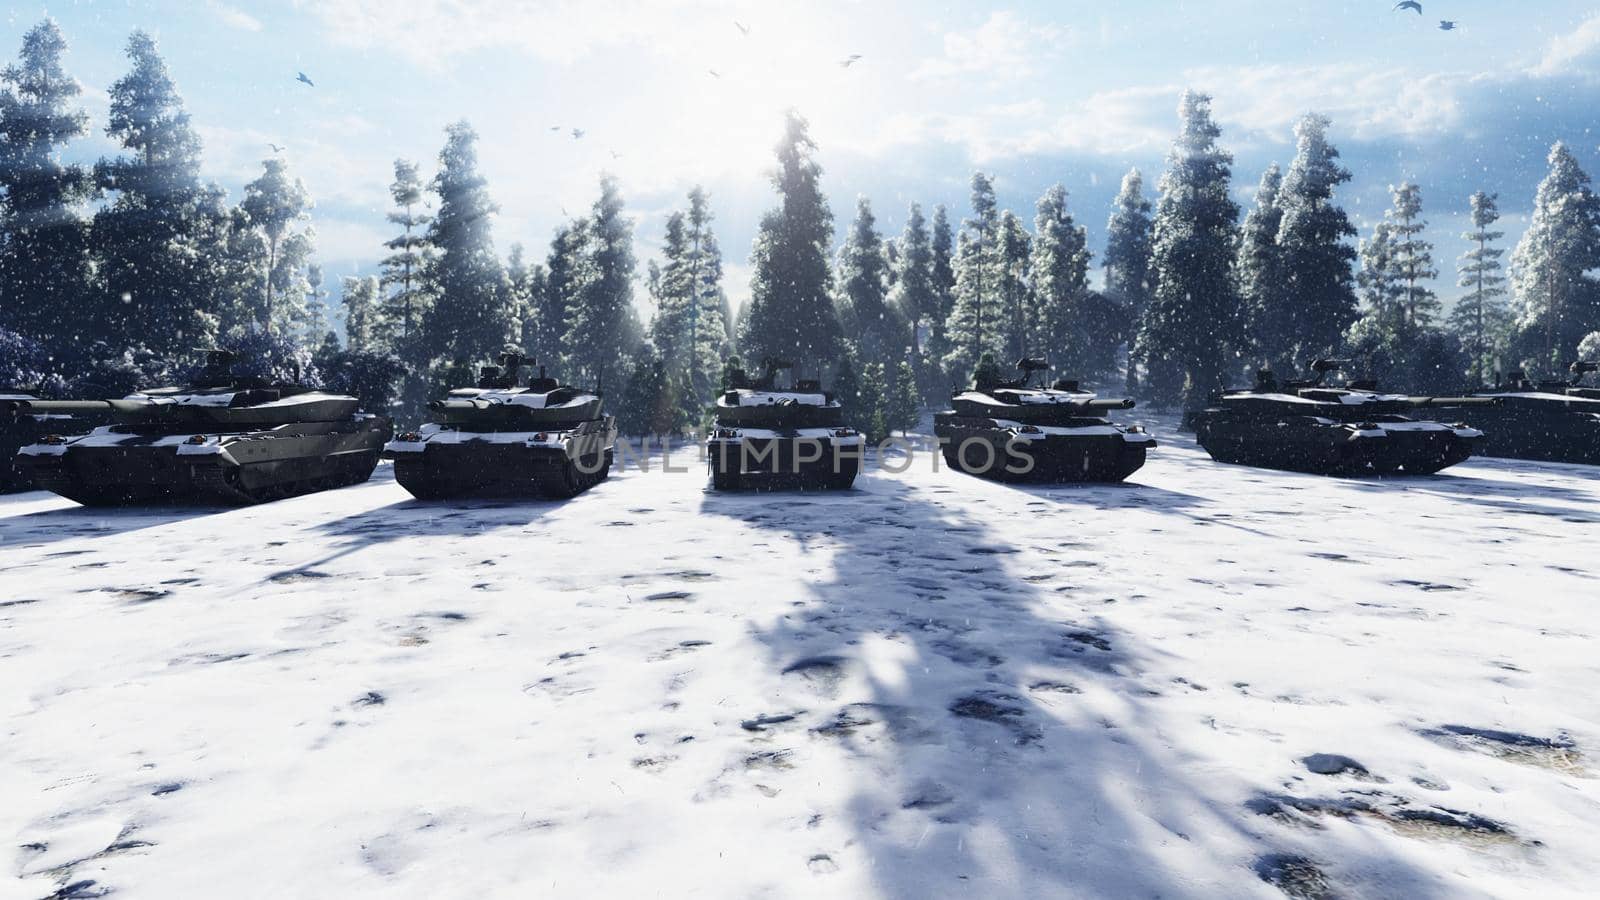 Military tanks clear Sunny winter day on the battlefield preparing to attack.